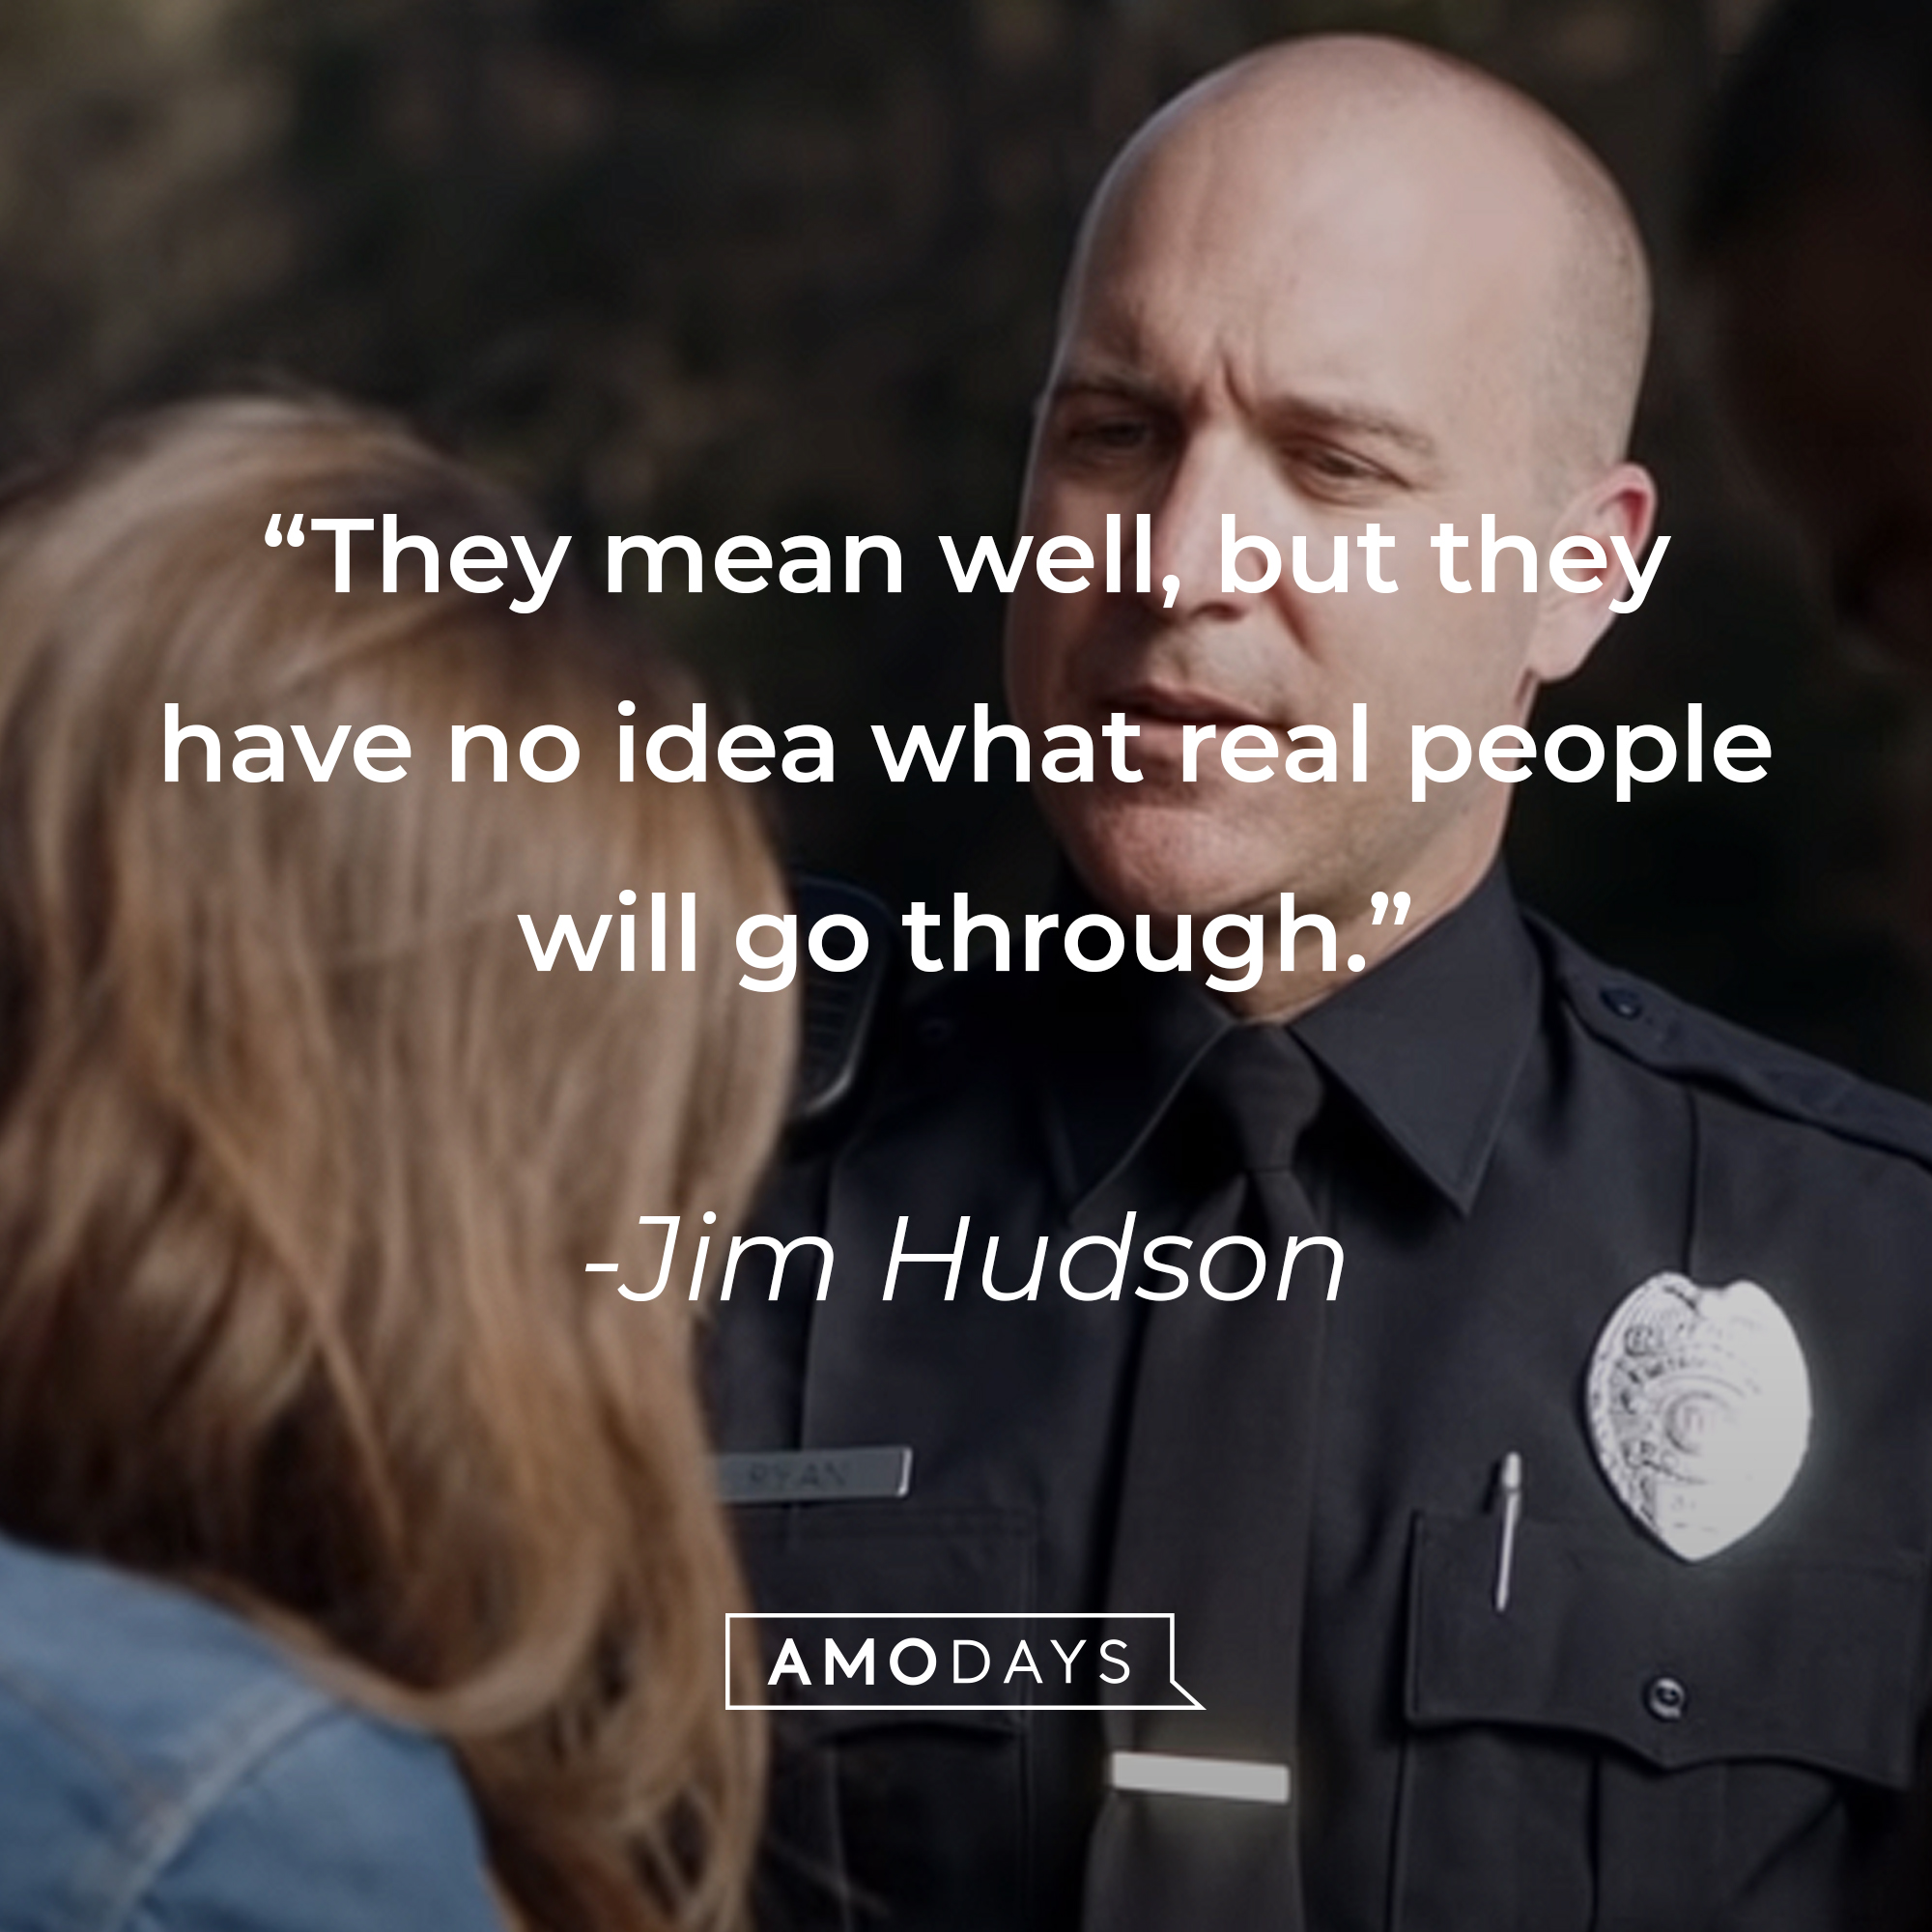 An image of a policeman with Jim Hudson’s quote: “They mean well, but they have no idea what real people will go through.” | Source: youtube.com/UniversalpicturesIta